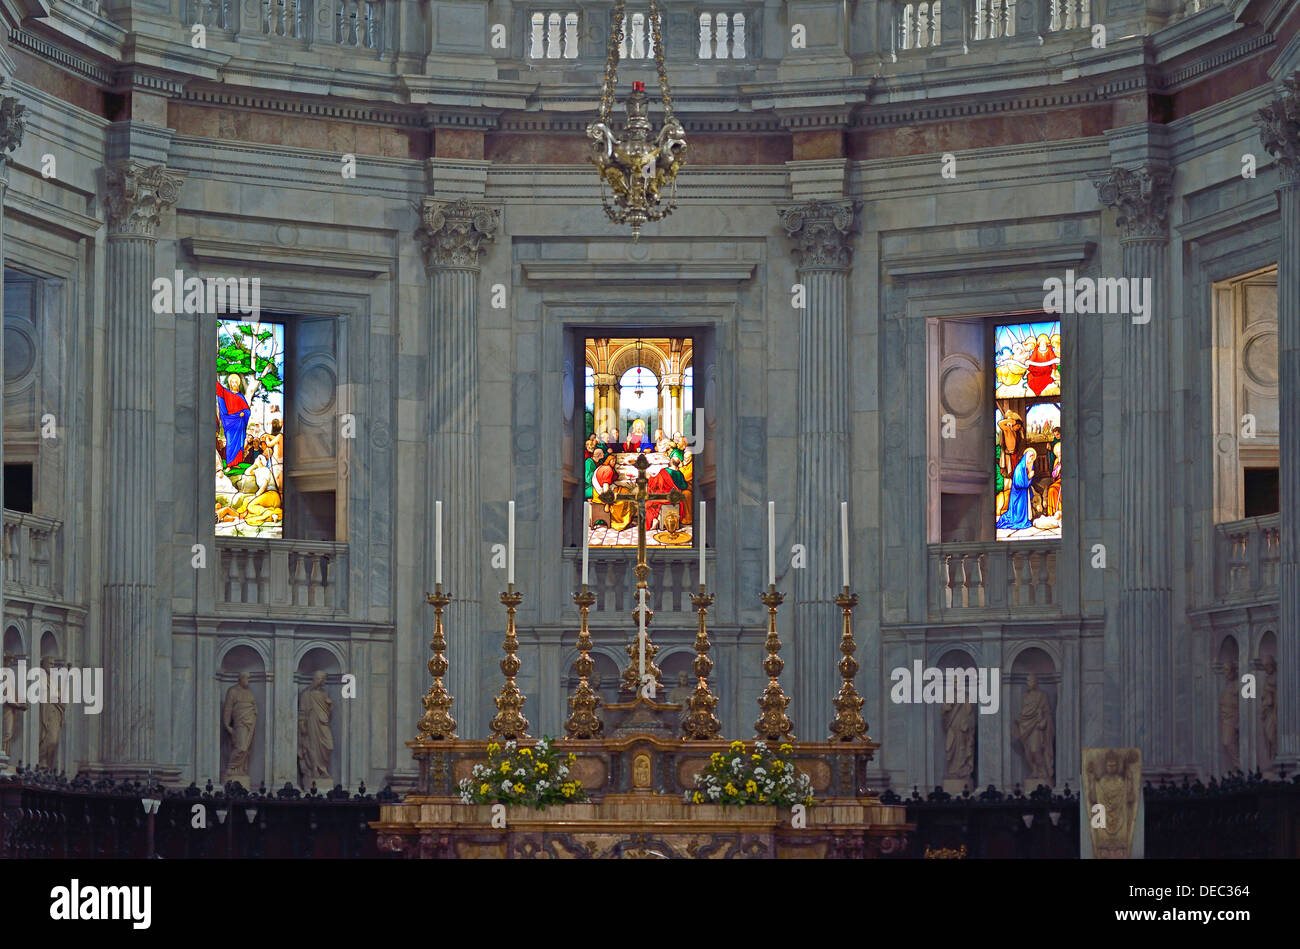 Interior, choir and altar of Como Cathedral, Cathedral of Santa Maria Maggiore, Como, Lombardy, Italy Stock Photo